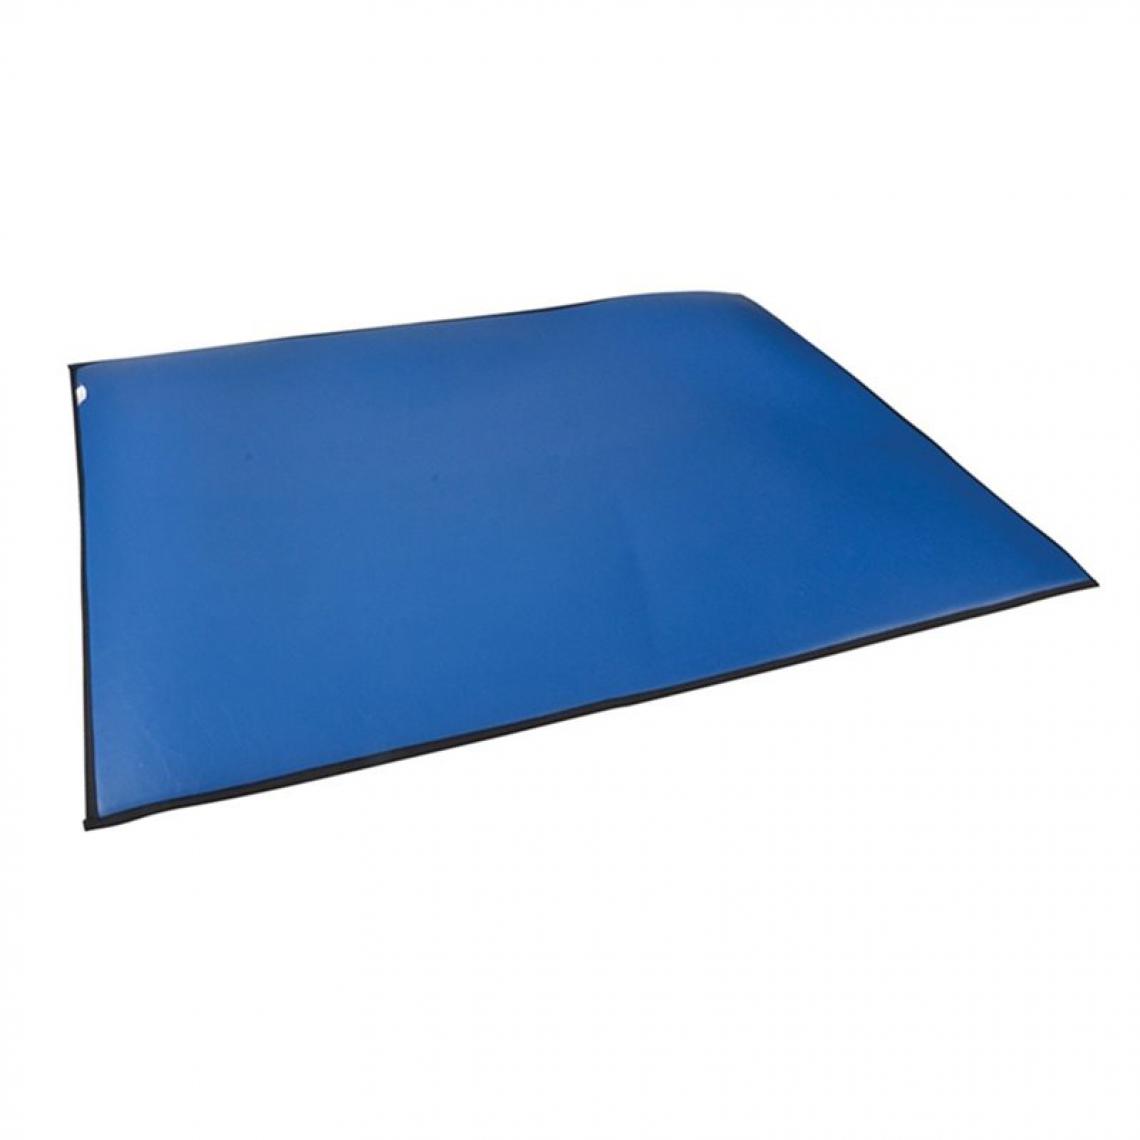 Dickie - Tapis de chauffagiste - 900 x 670 mm - Mastic, silicone, joint